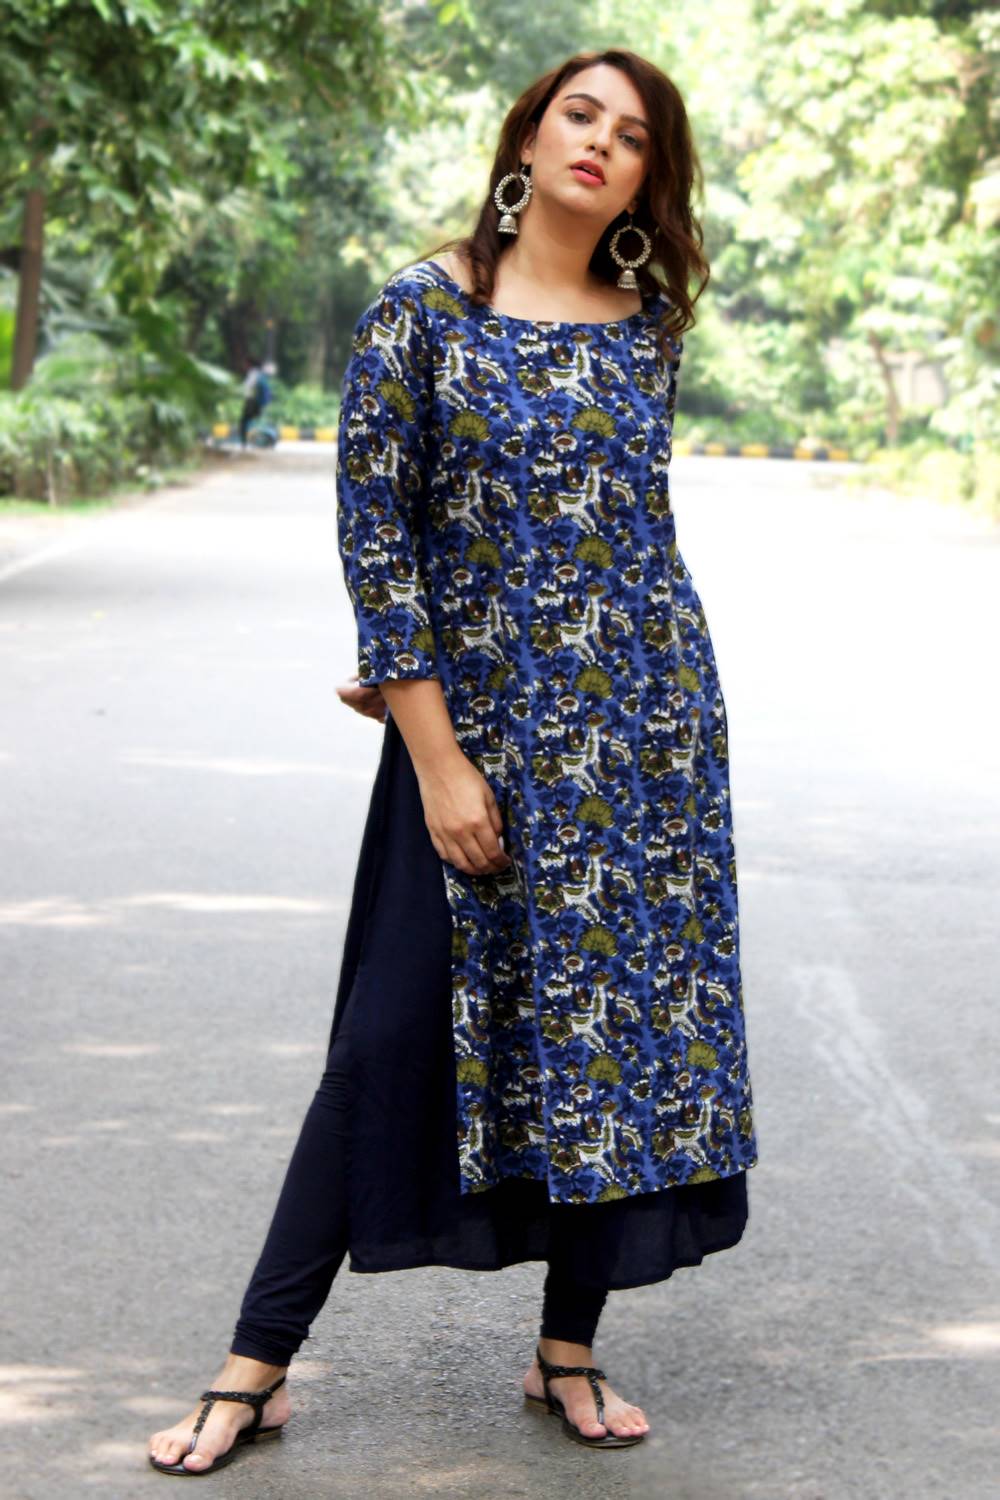 Shraddha Kapoor Looks Graceful In Kurti And Jeans